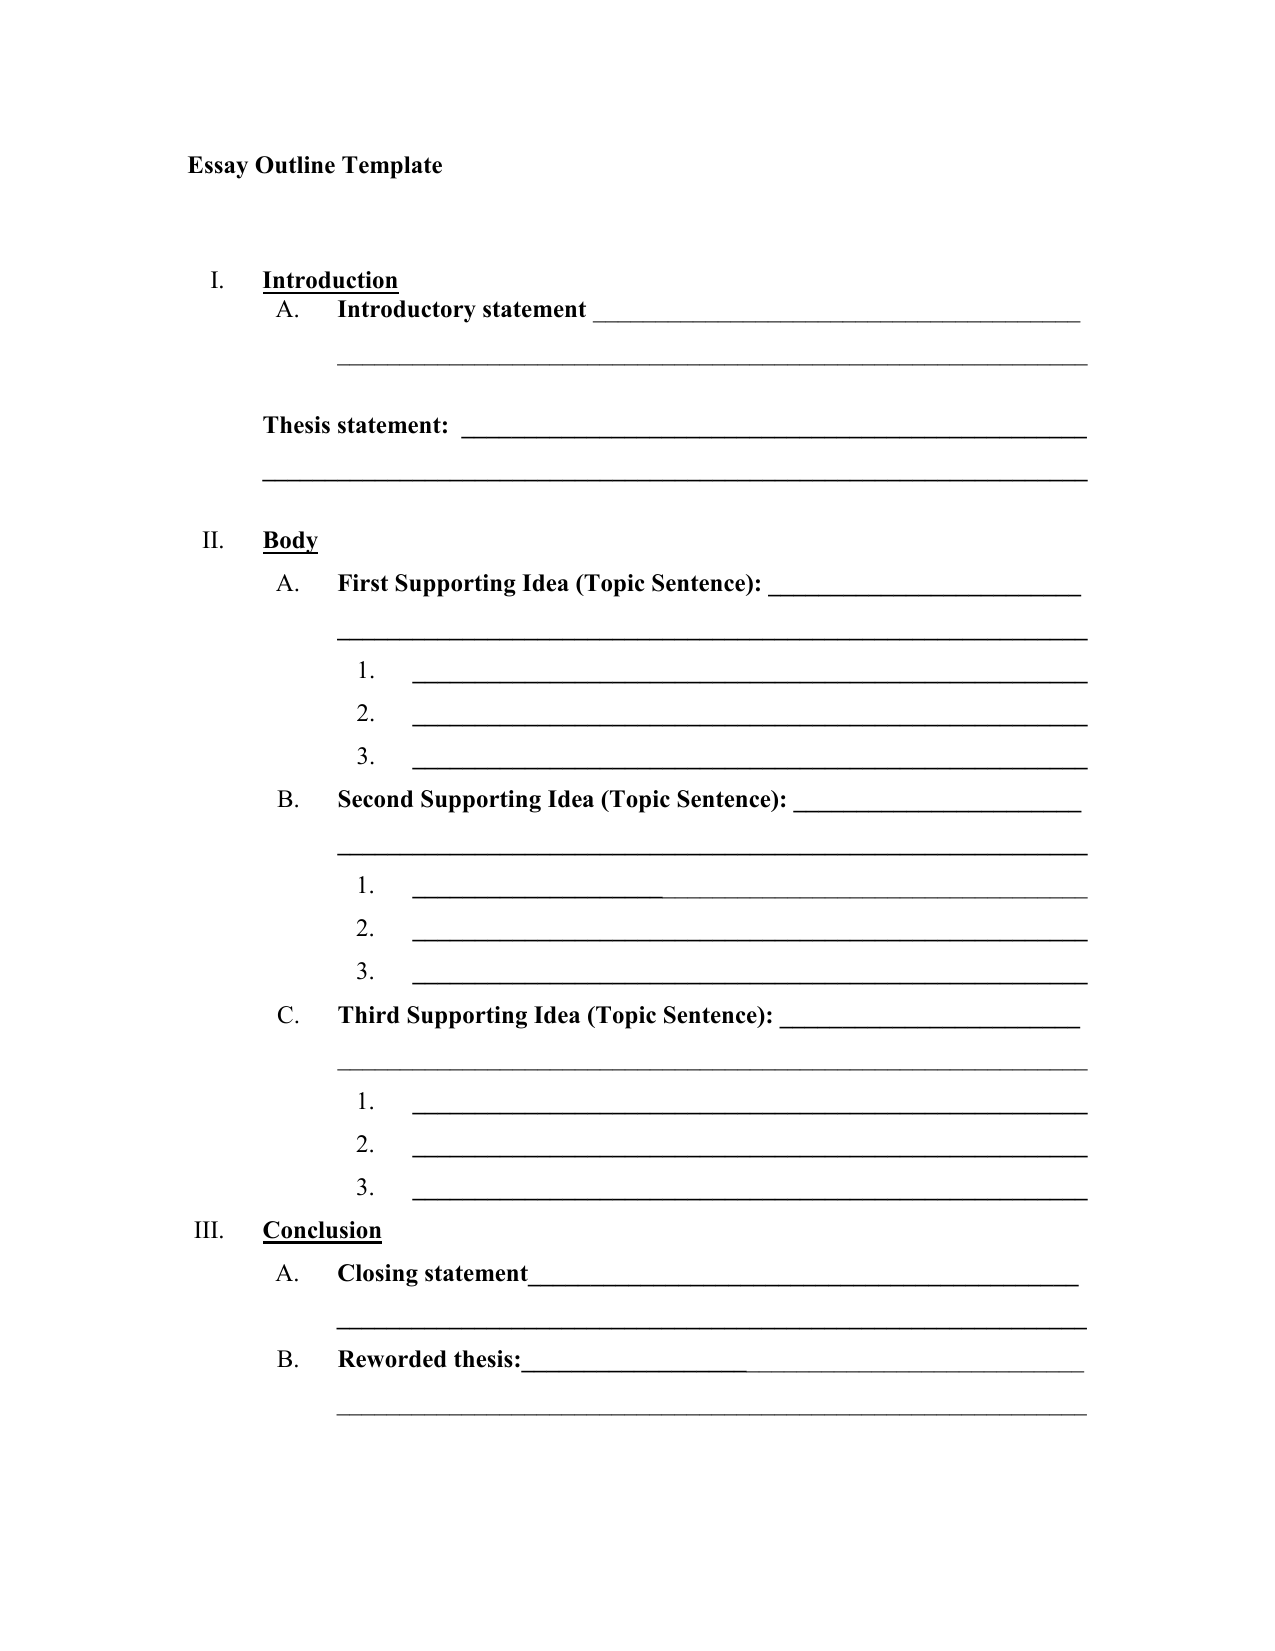 examples of essay outline templates